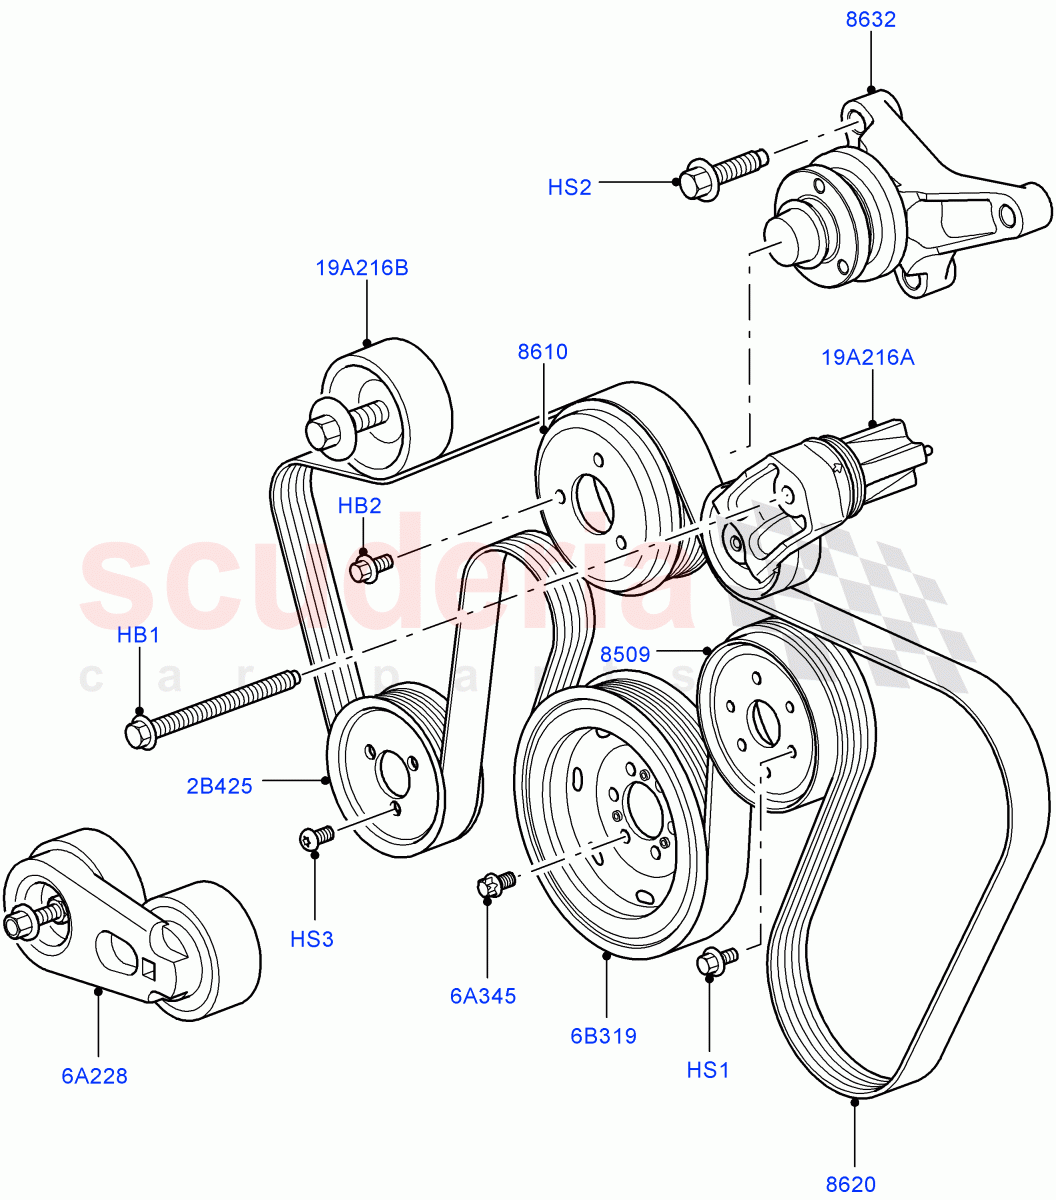 Pulleys And Drive Belts(Lion Diesel 2.7 V6 (140KW),With Roll Stability Control)((V)TO9A999999) of Land Rover Land Rover Range Rover Sport (2005-2009) [2.7 Diesel V6]